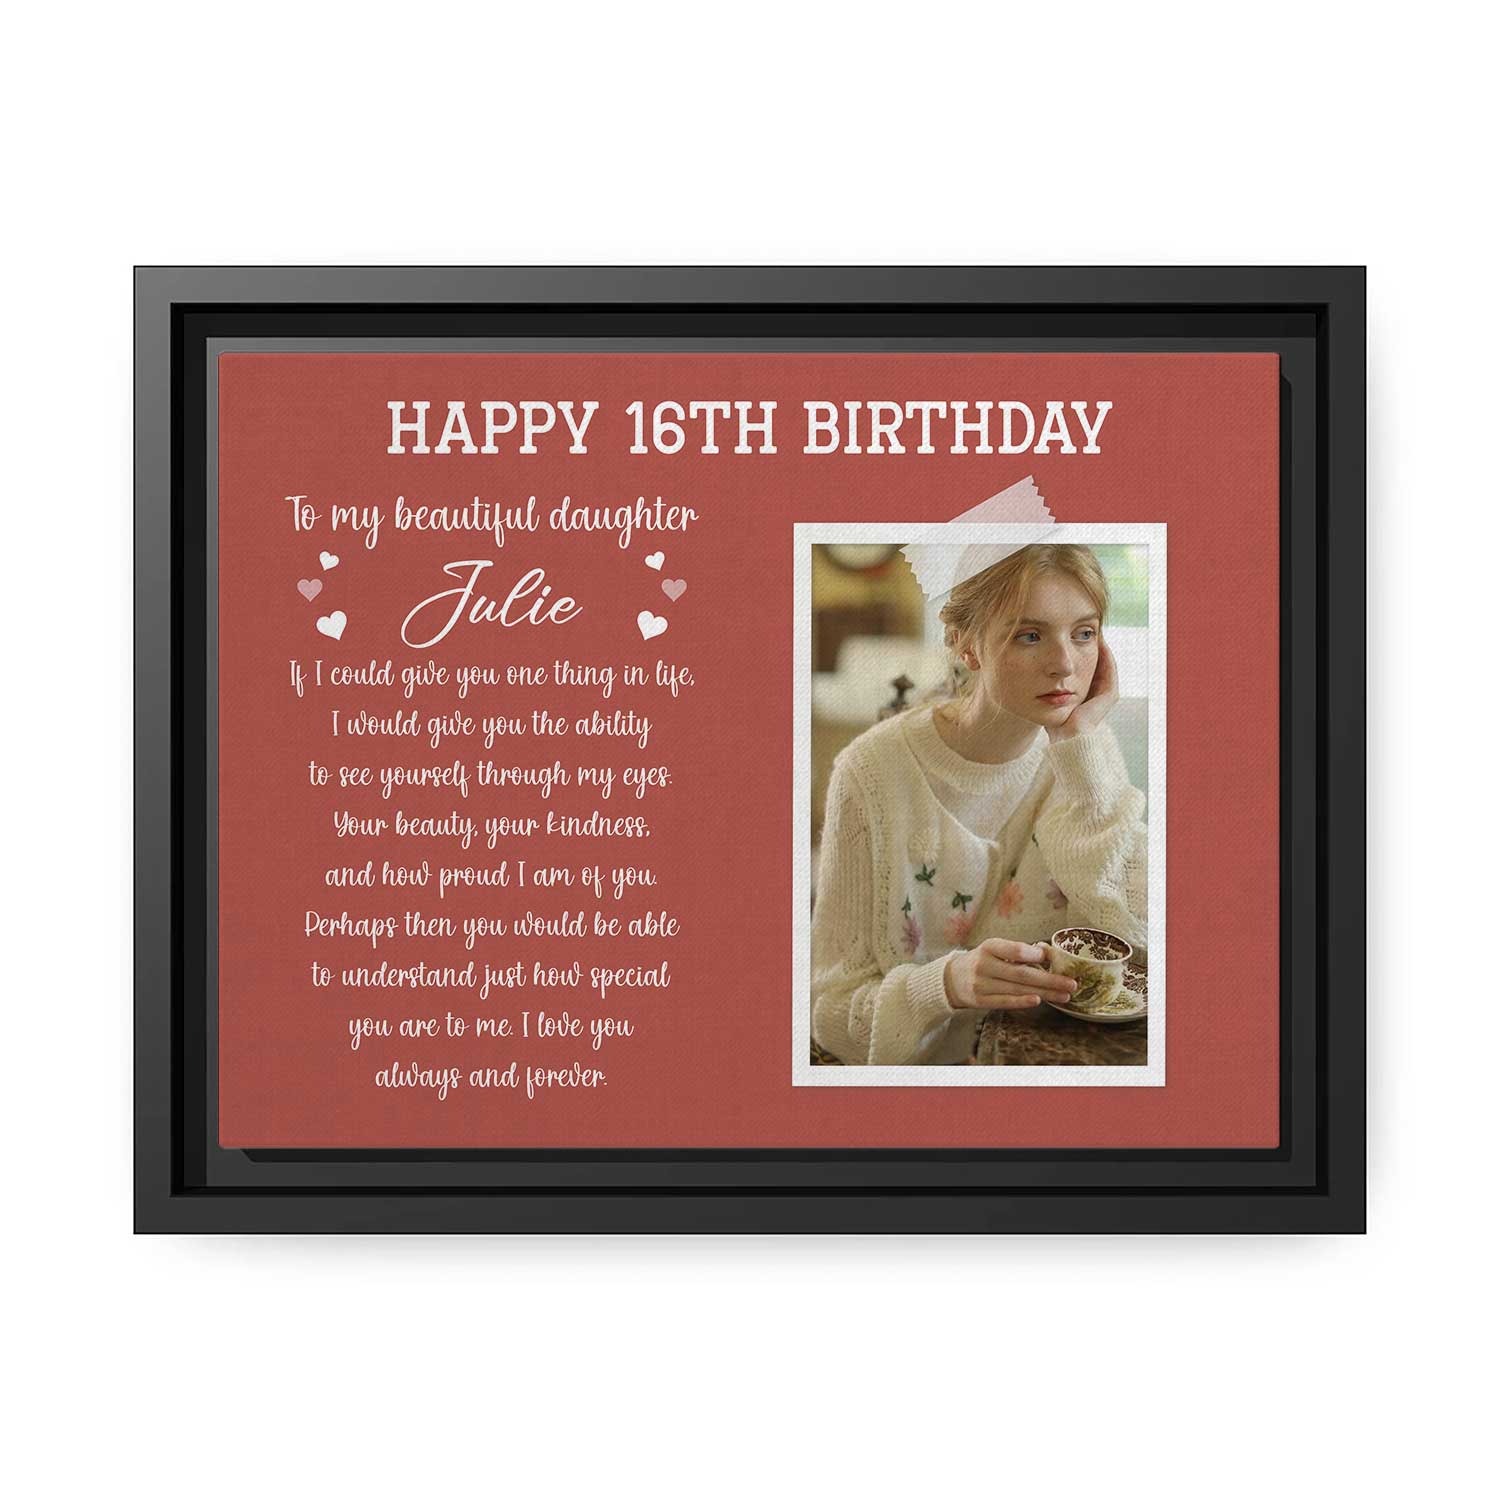 Happy 16th Birthday - Personalized 16th Birthday gift For Daughter - Custom Canvas Print - MyMindfulGifts